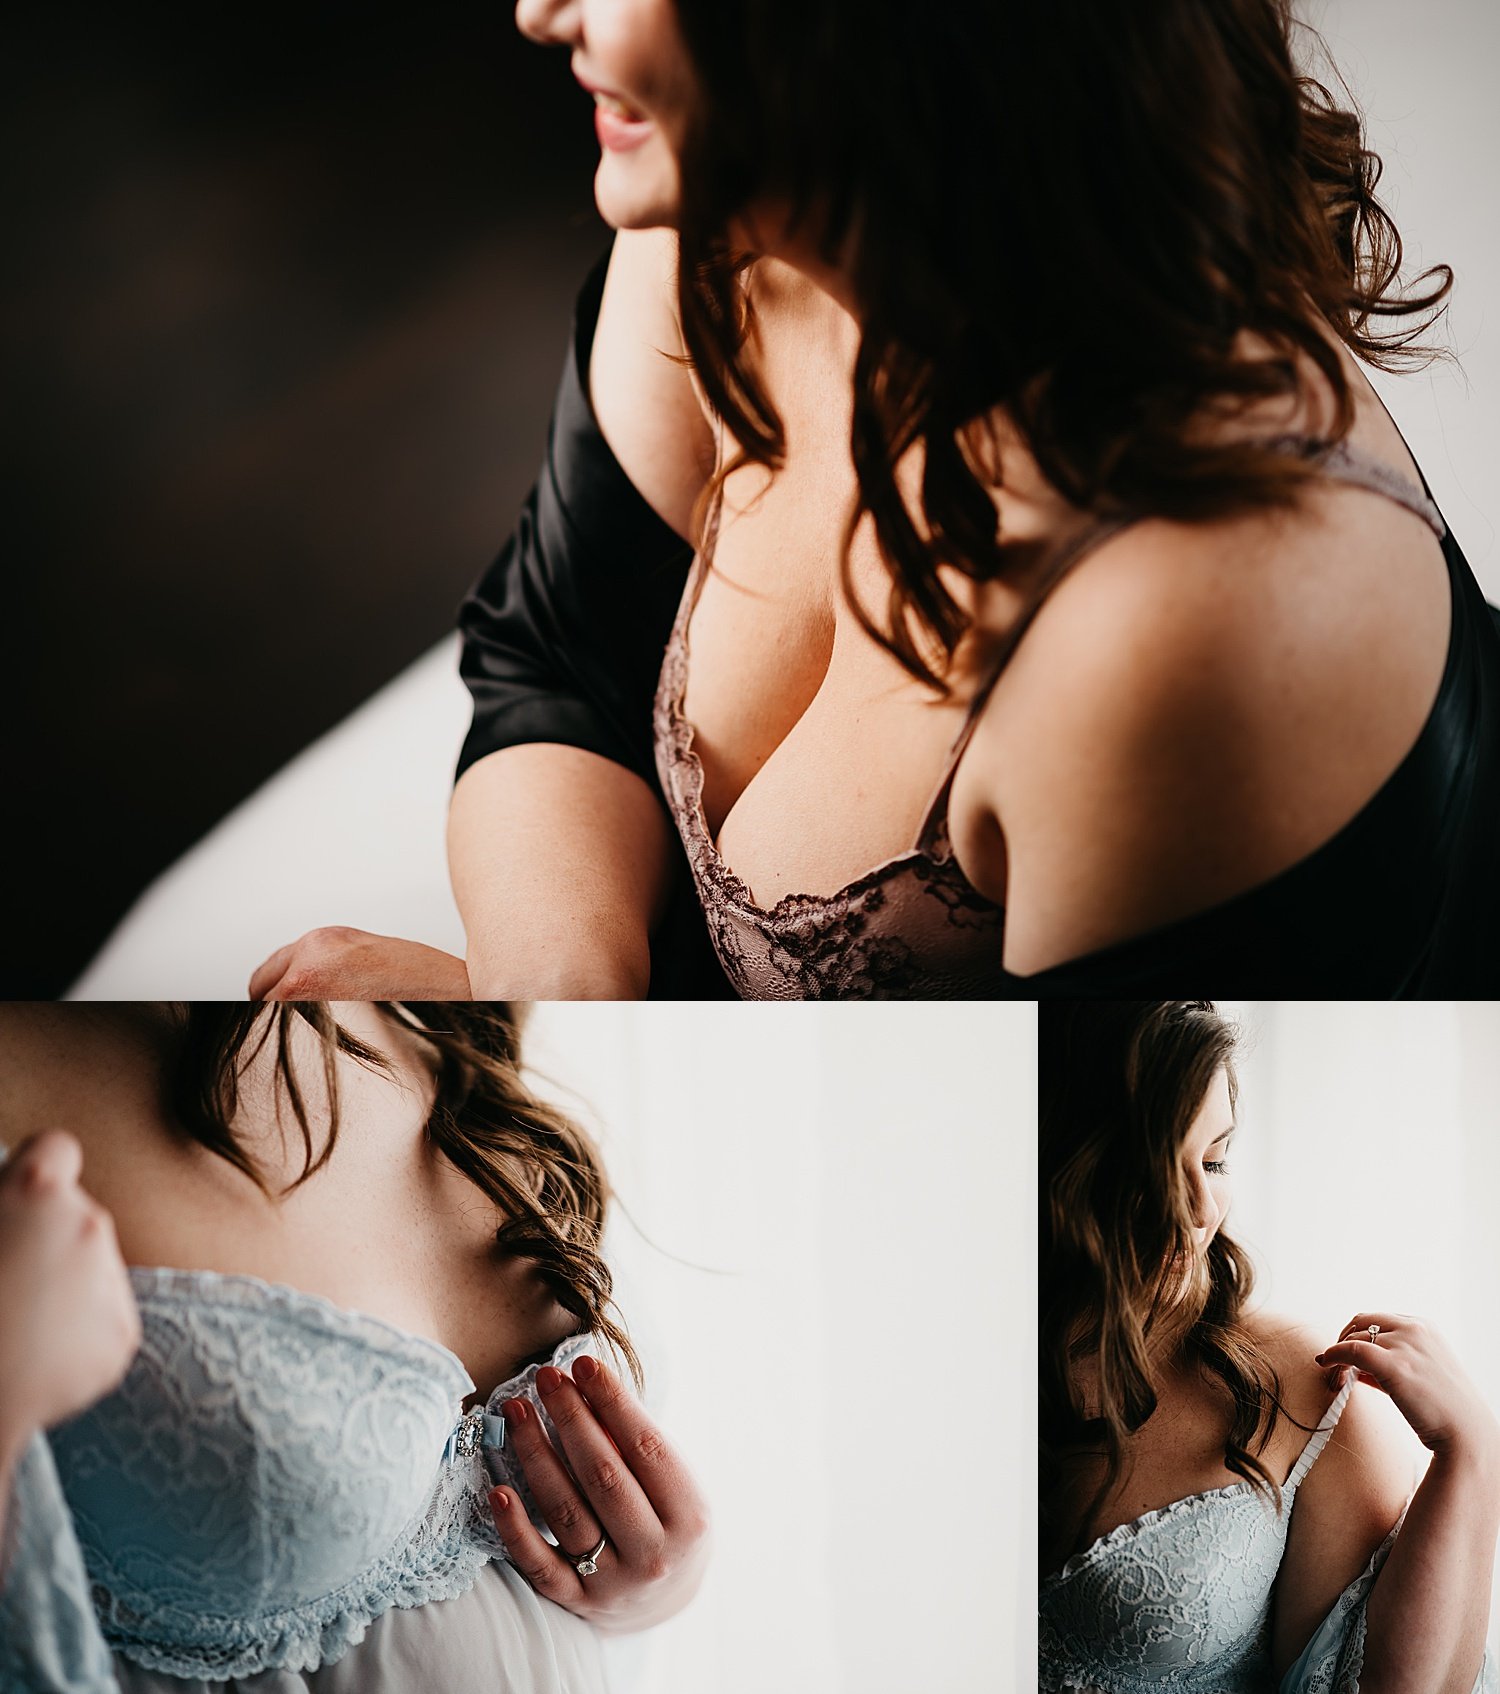  tips for picking your boudoir photographer session while woman wearing lace lingerie  